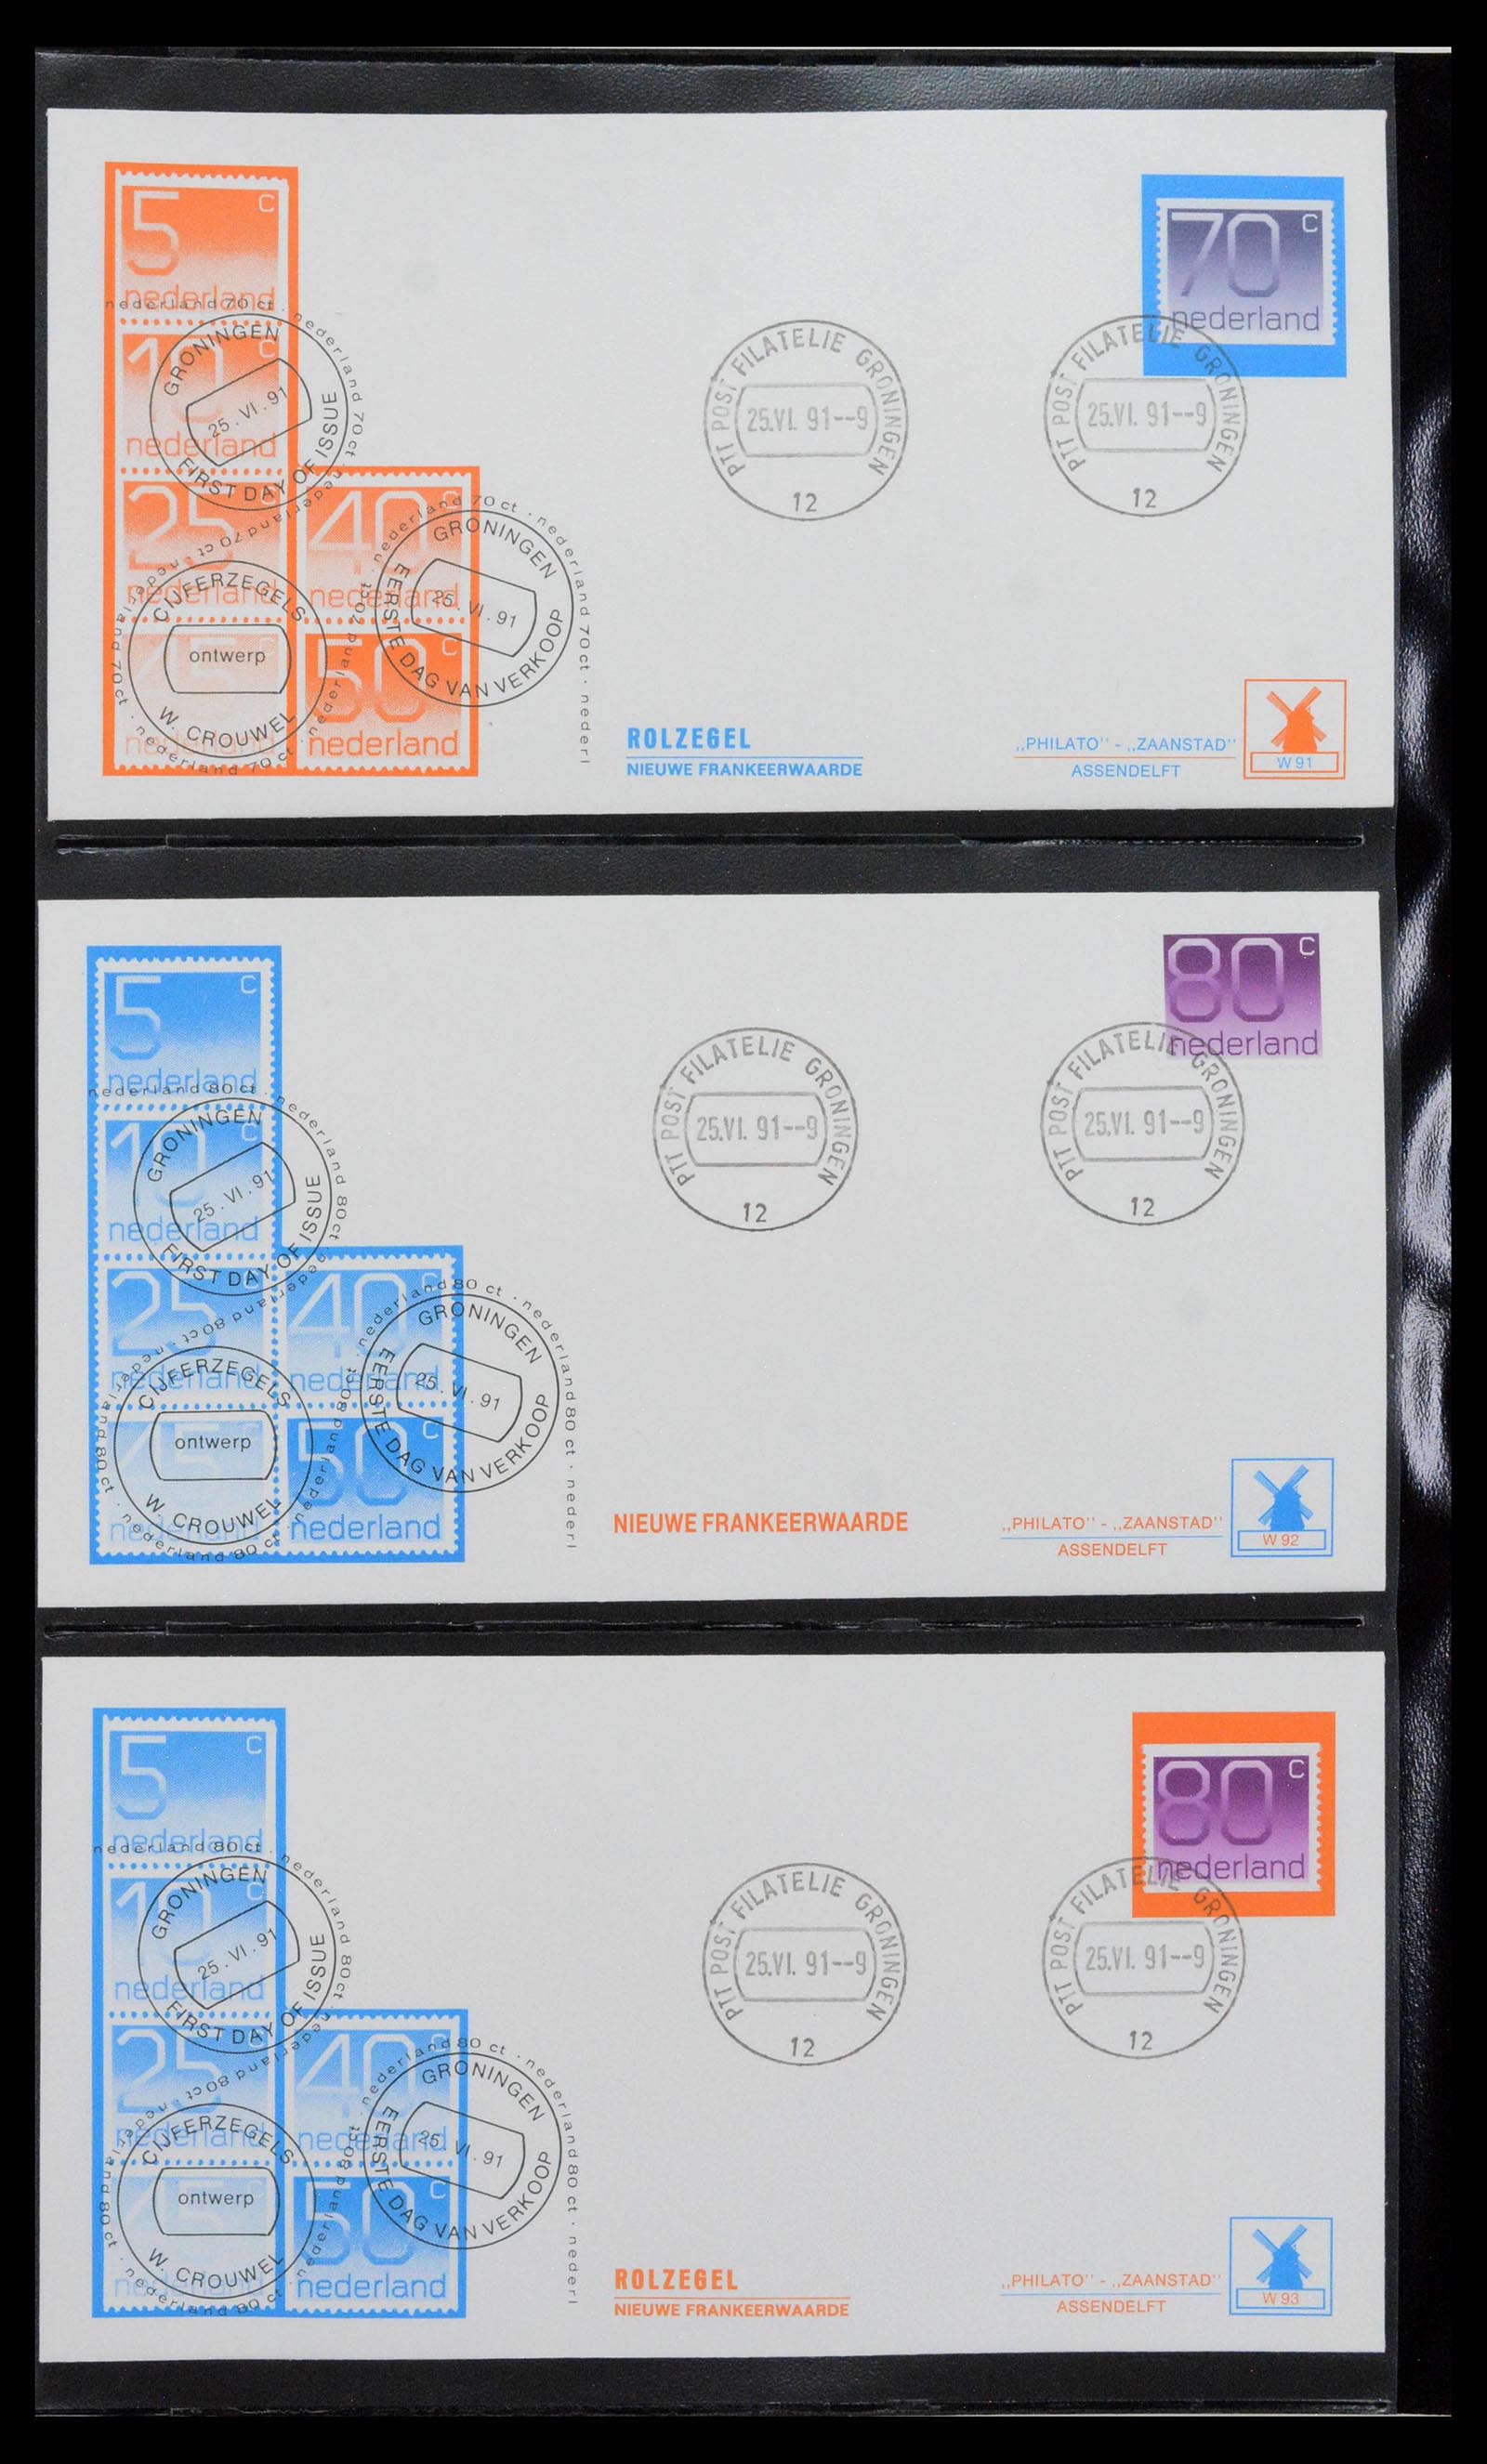 38559 0032 - Stamp collection 38559 Netherlands special first day covers.